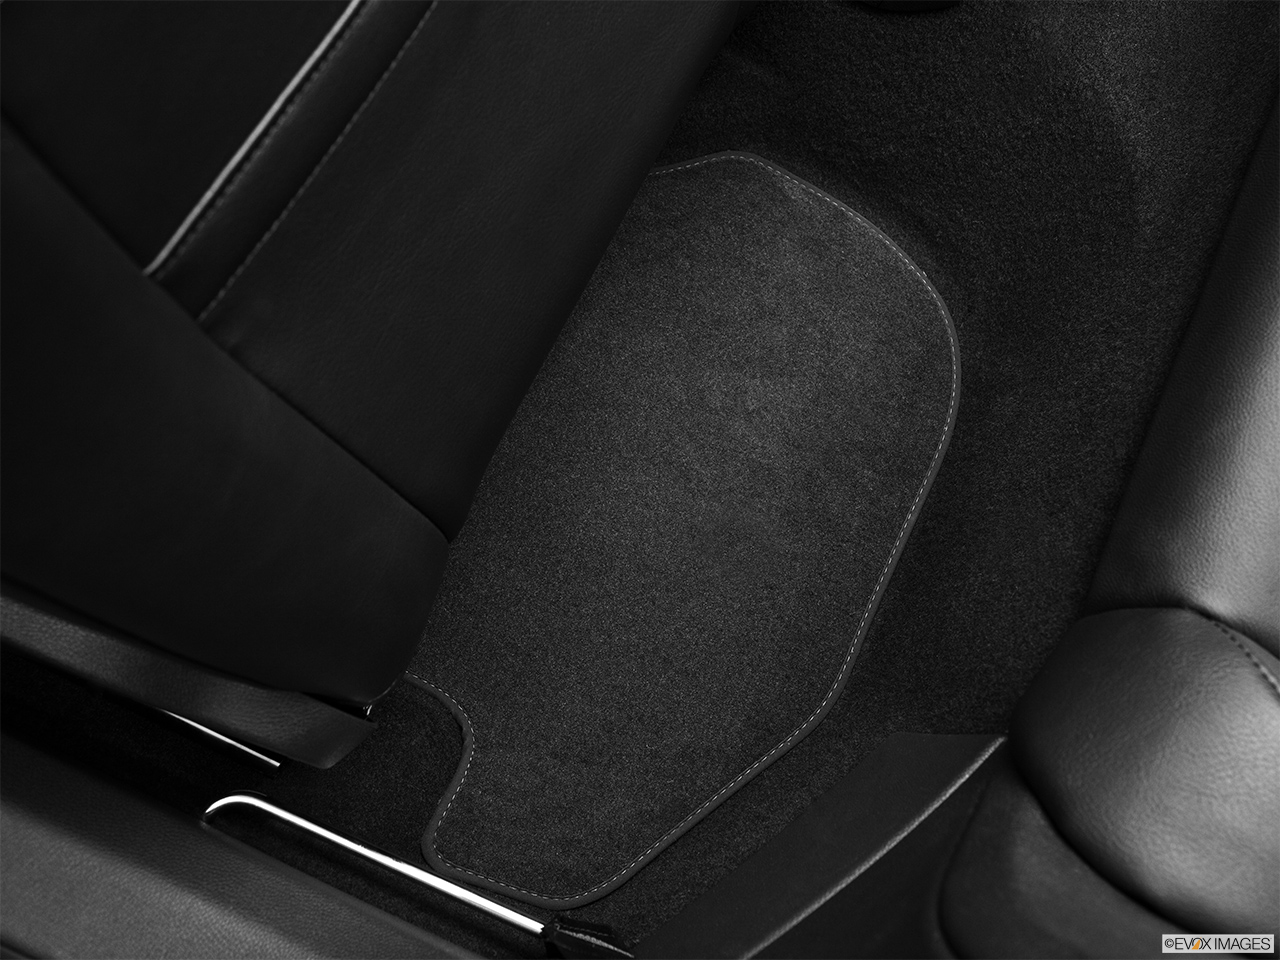 2012 Volkswagen Eos Lux Rear driver's side floor mat. Mid-seat level from outside looking in. 